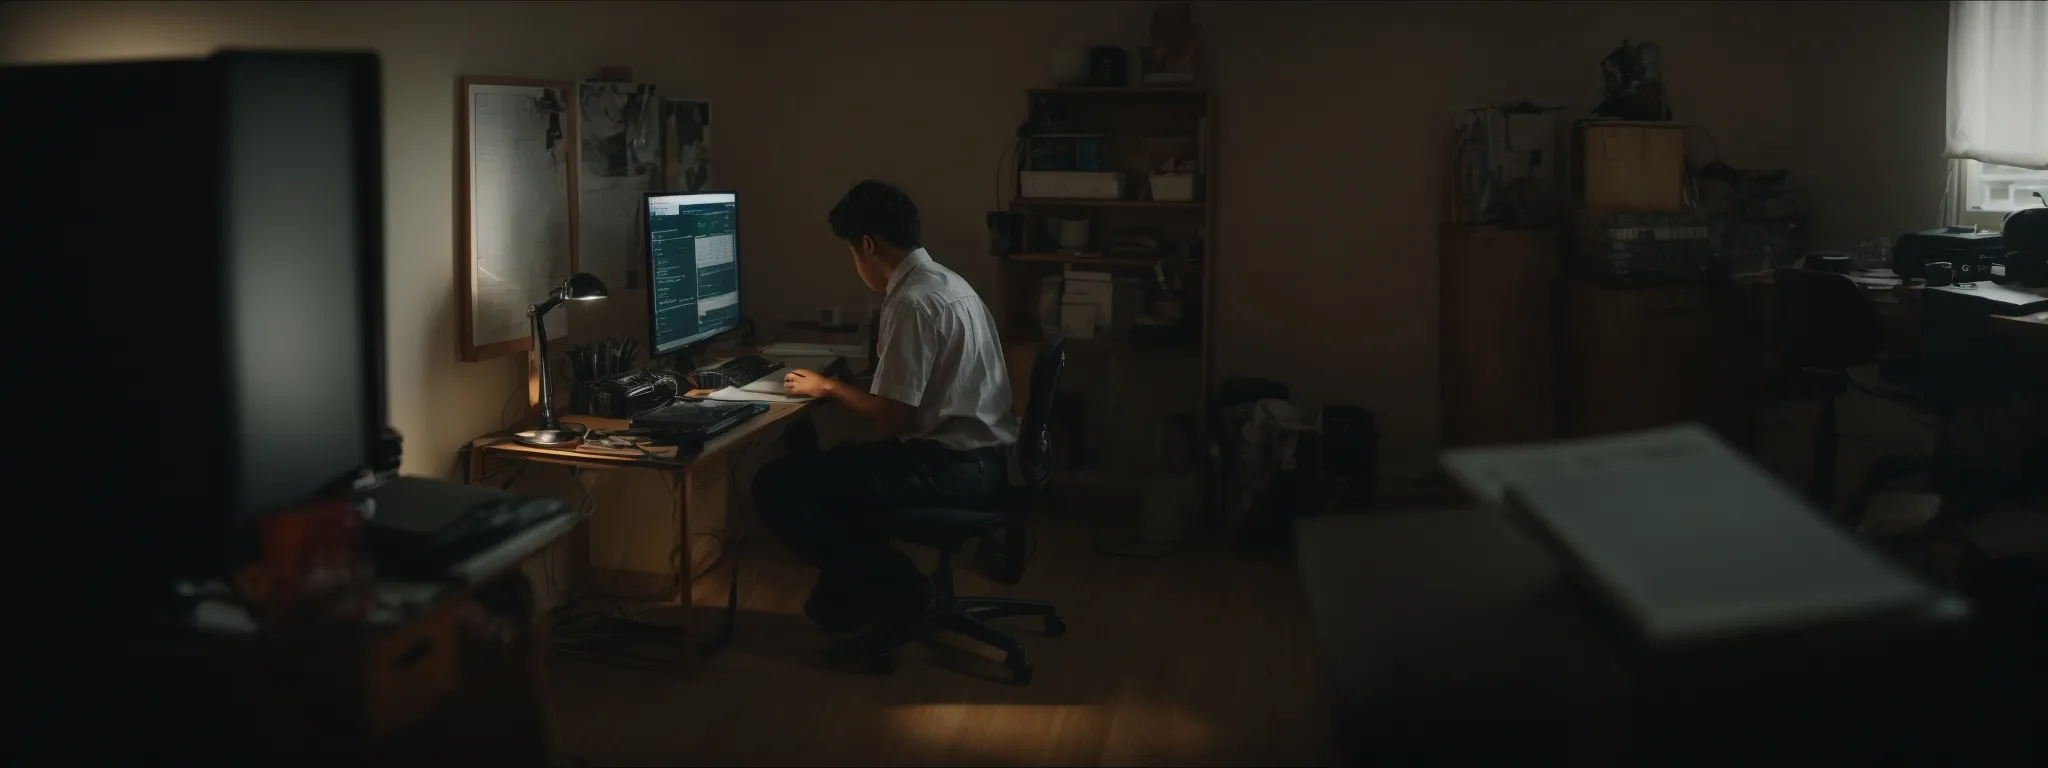 a person sitting at a computer in a well-lit room, typing on a keyboard with an open notepad beside them.